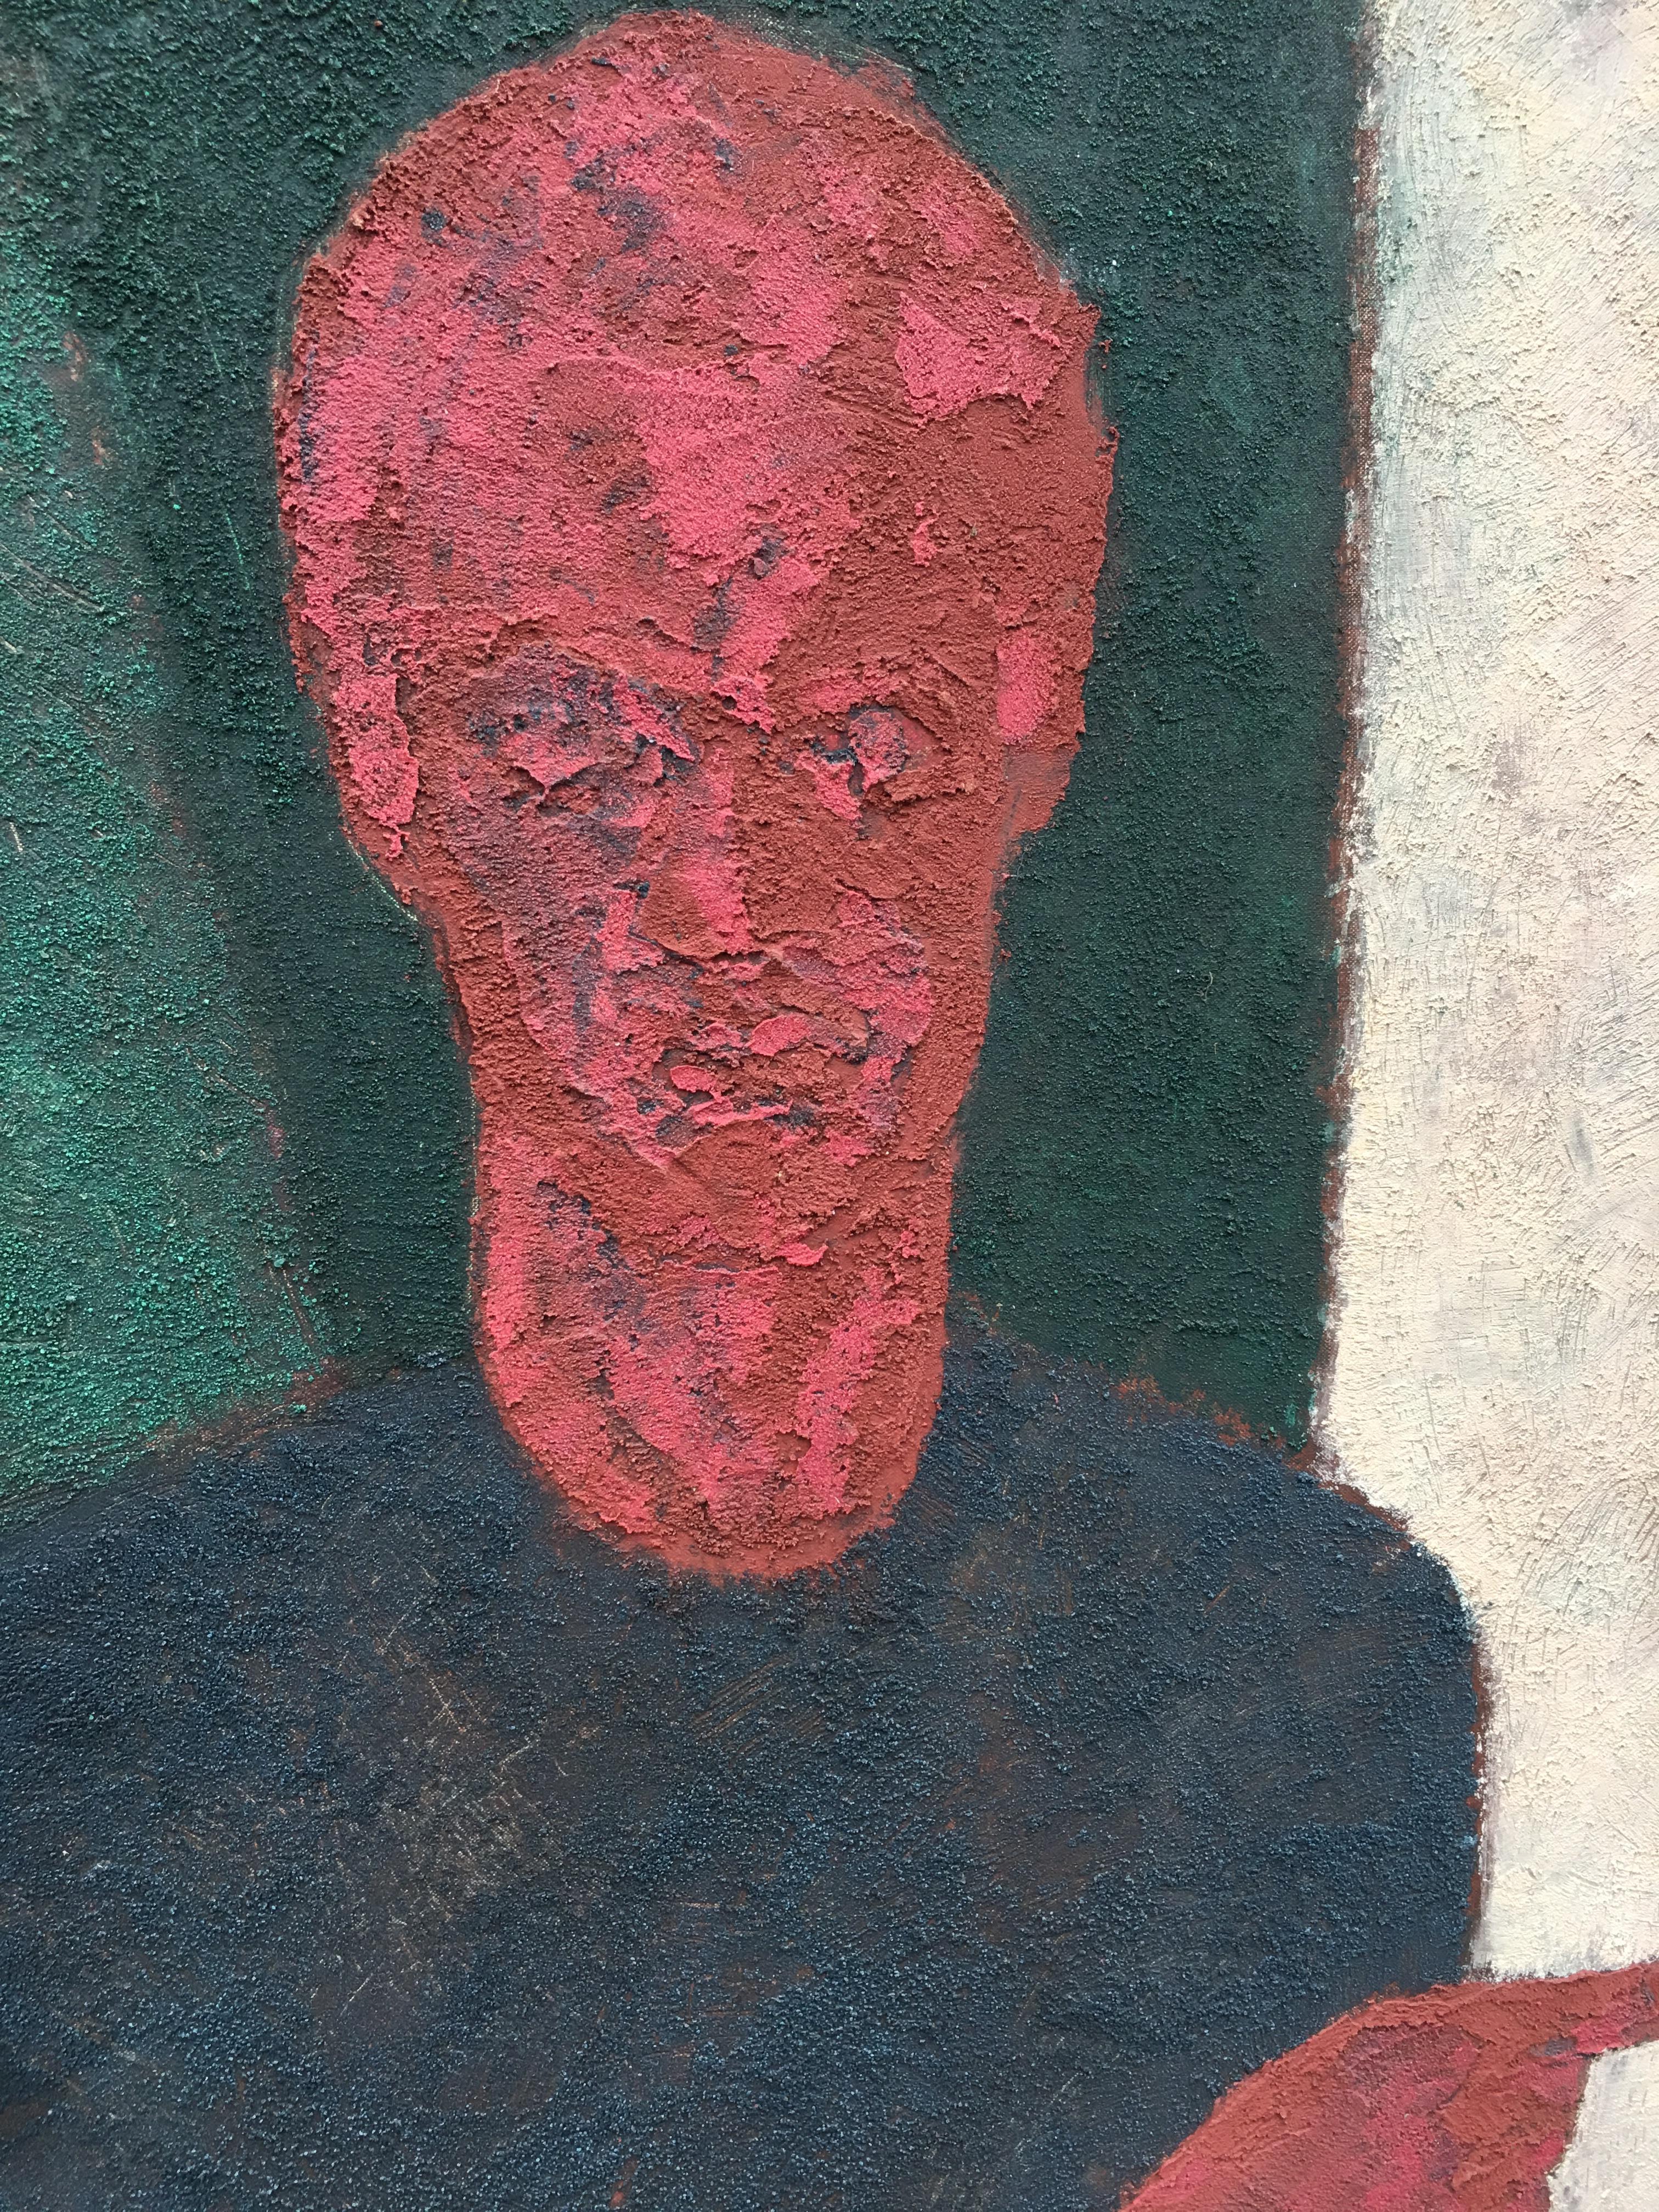 Marko Milovanovic self-portrait red and green with raised finger, painting and pigments, signed below and dated 1991.